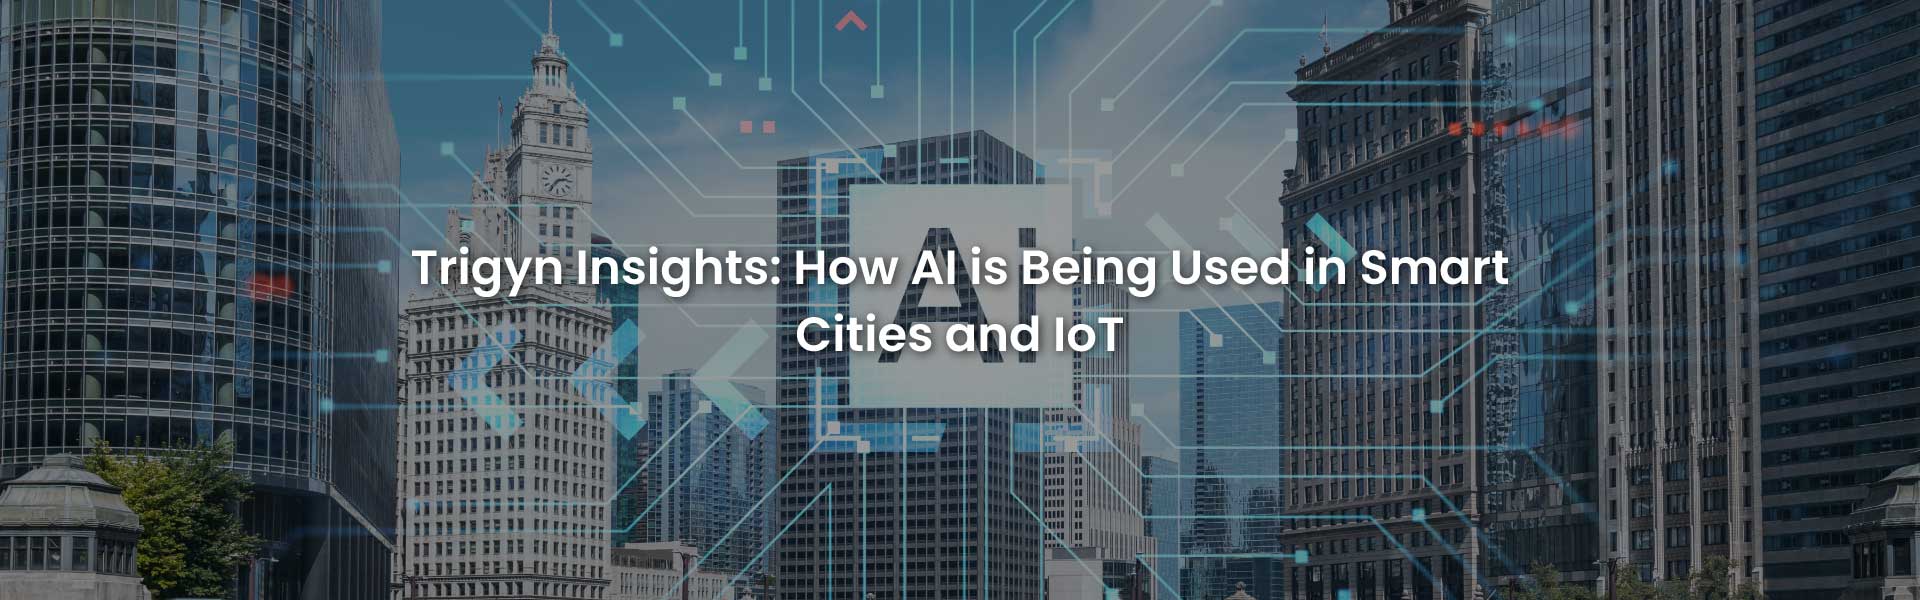 AI is Being Used in Smart Cities and IoT